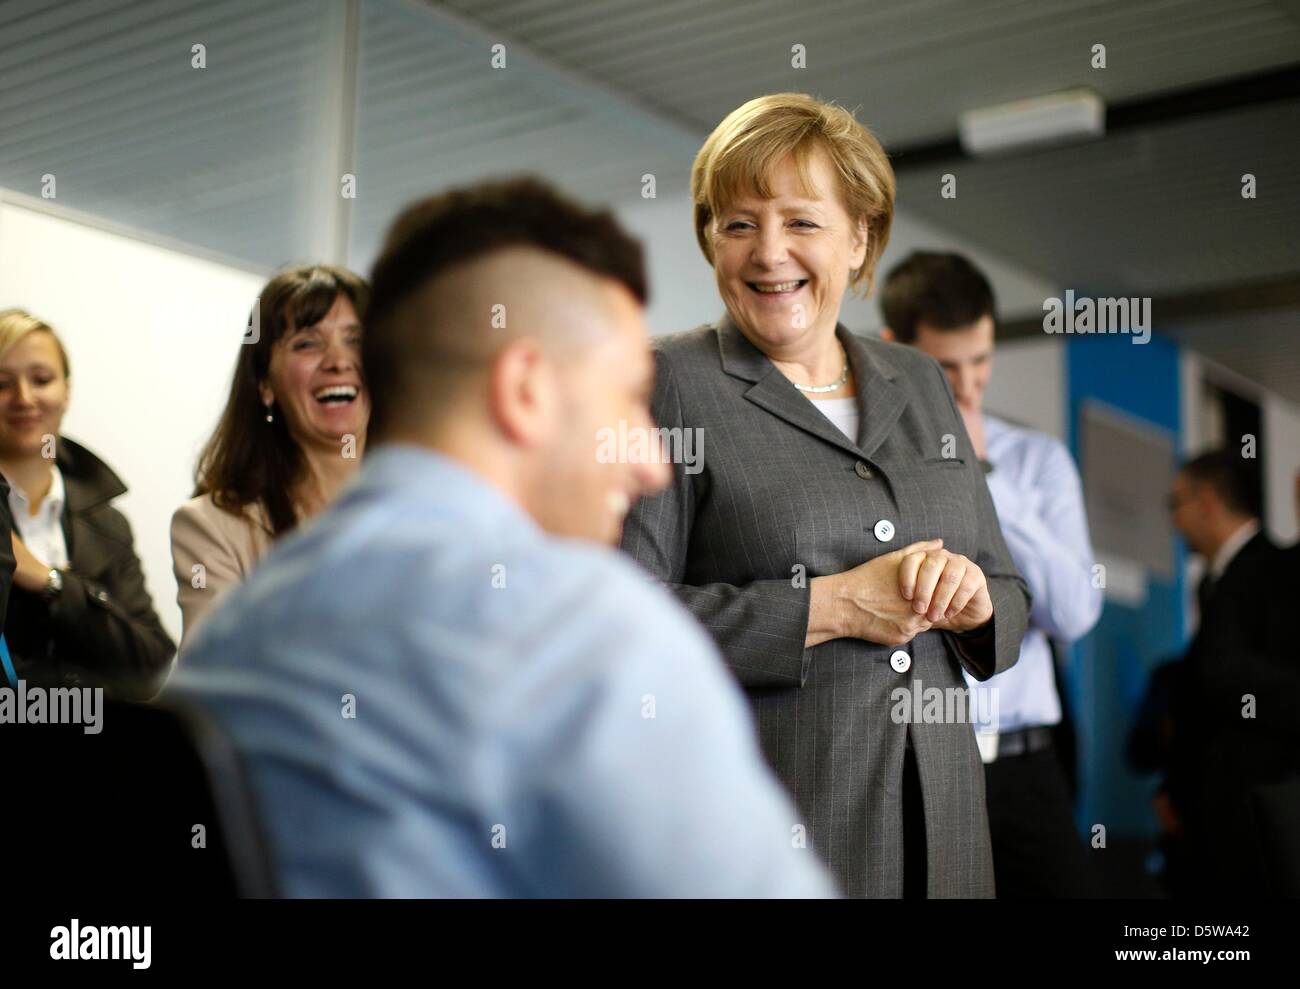 German Chancellor Angela Merkel talks with a trainee during a visit to the pneumatic systems producing company Mader GmbH in Leinfelden-Echterdingen near Stuttgart April 9, 2013, as part of a demography tour. Photo: Lisi Niesner/dpa +++(c) dpa - Bildfunk+++ Stock Photo